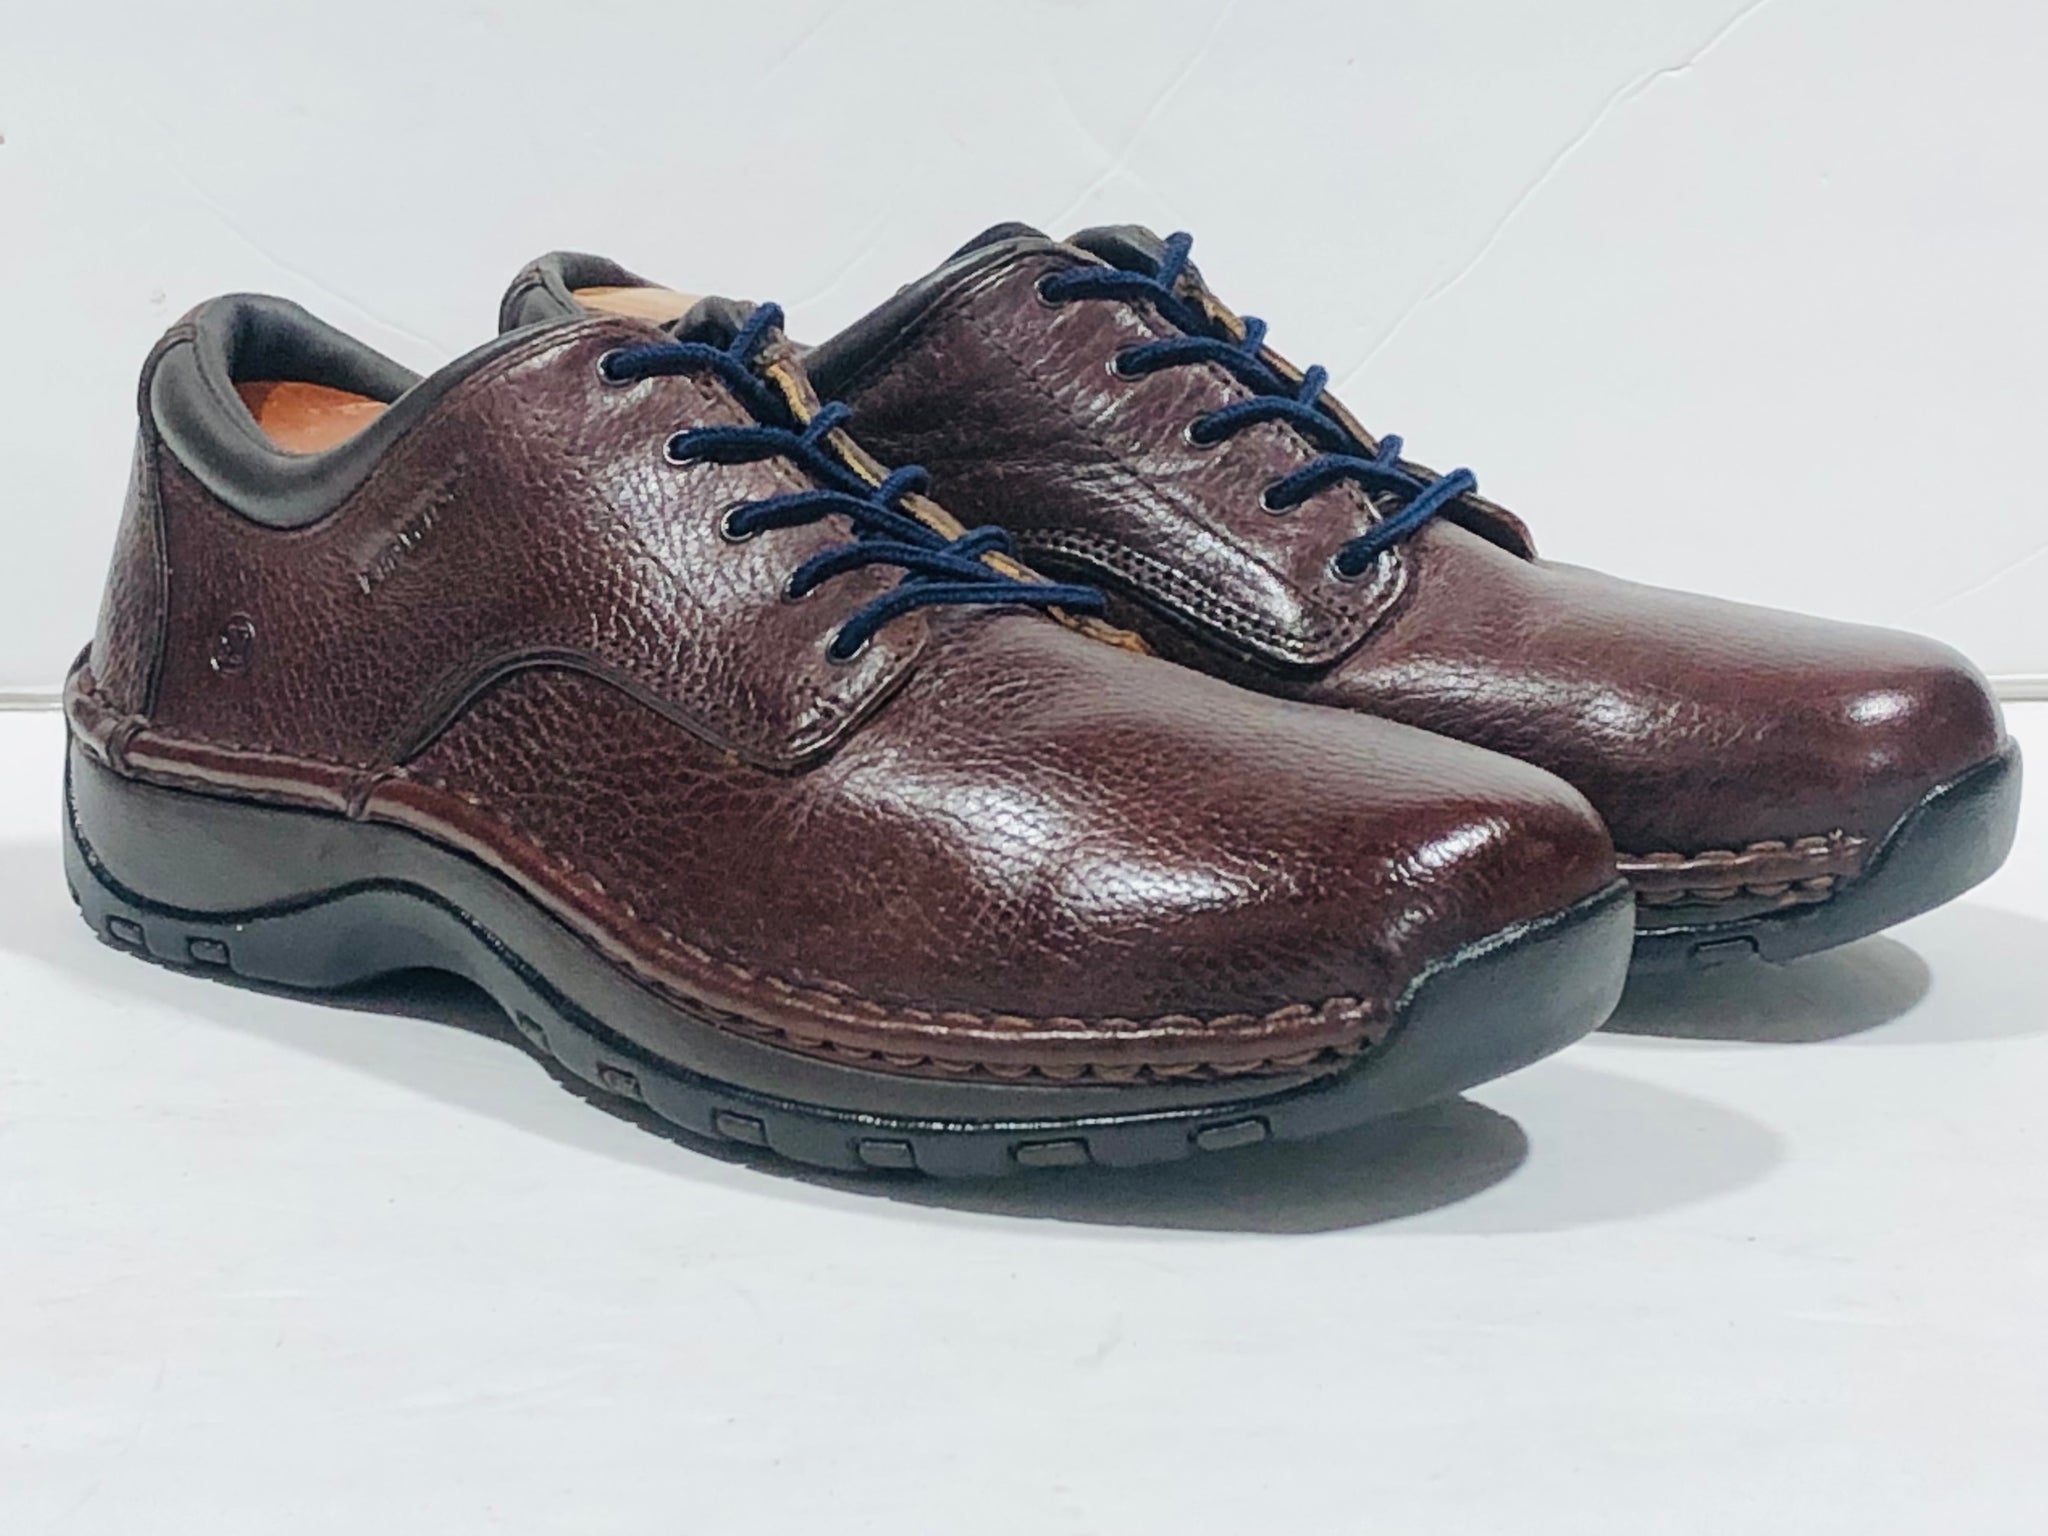 2014 Red wing shoes #8704 steel toe – Greenwich Vintage